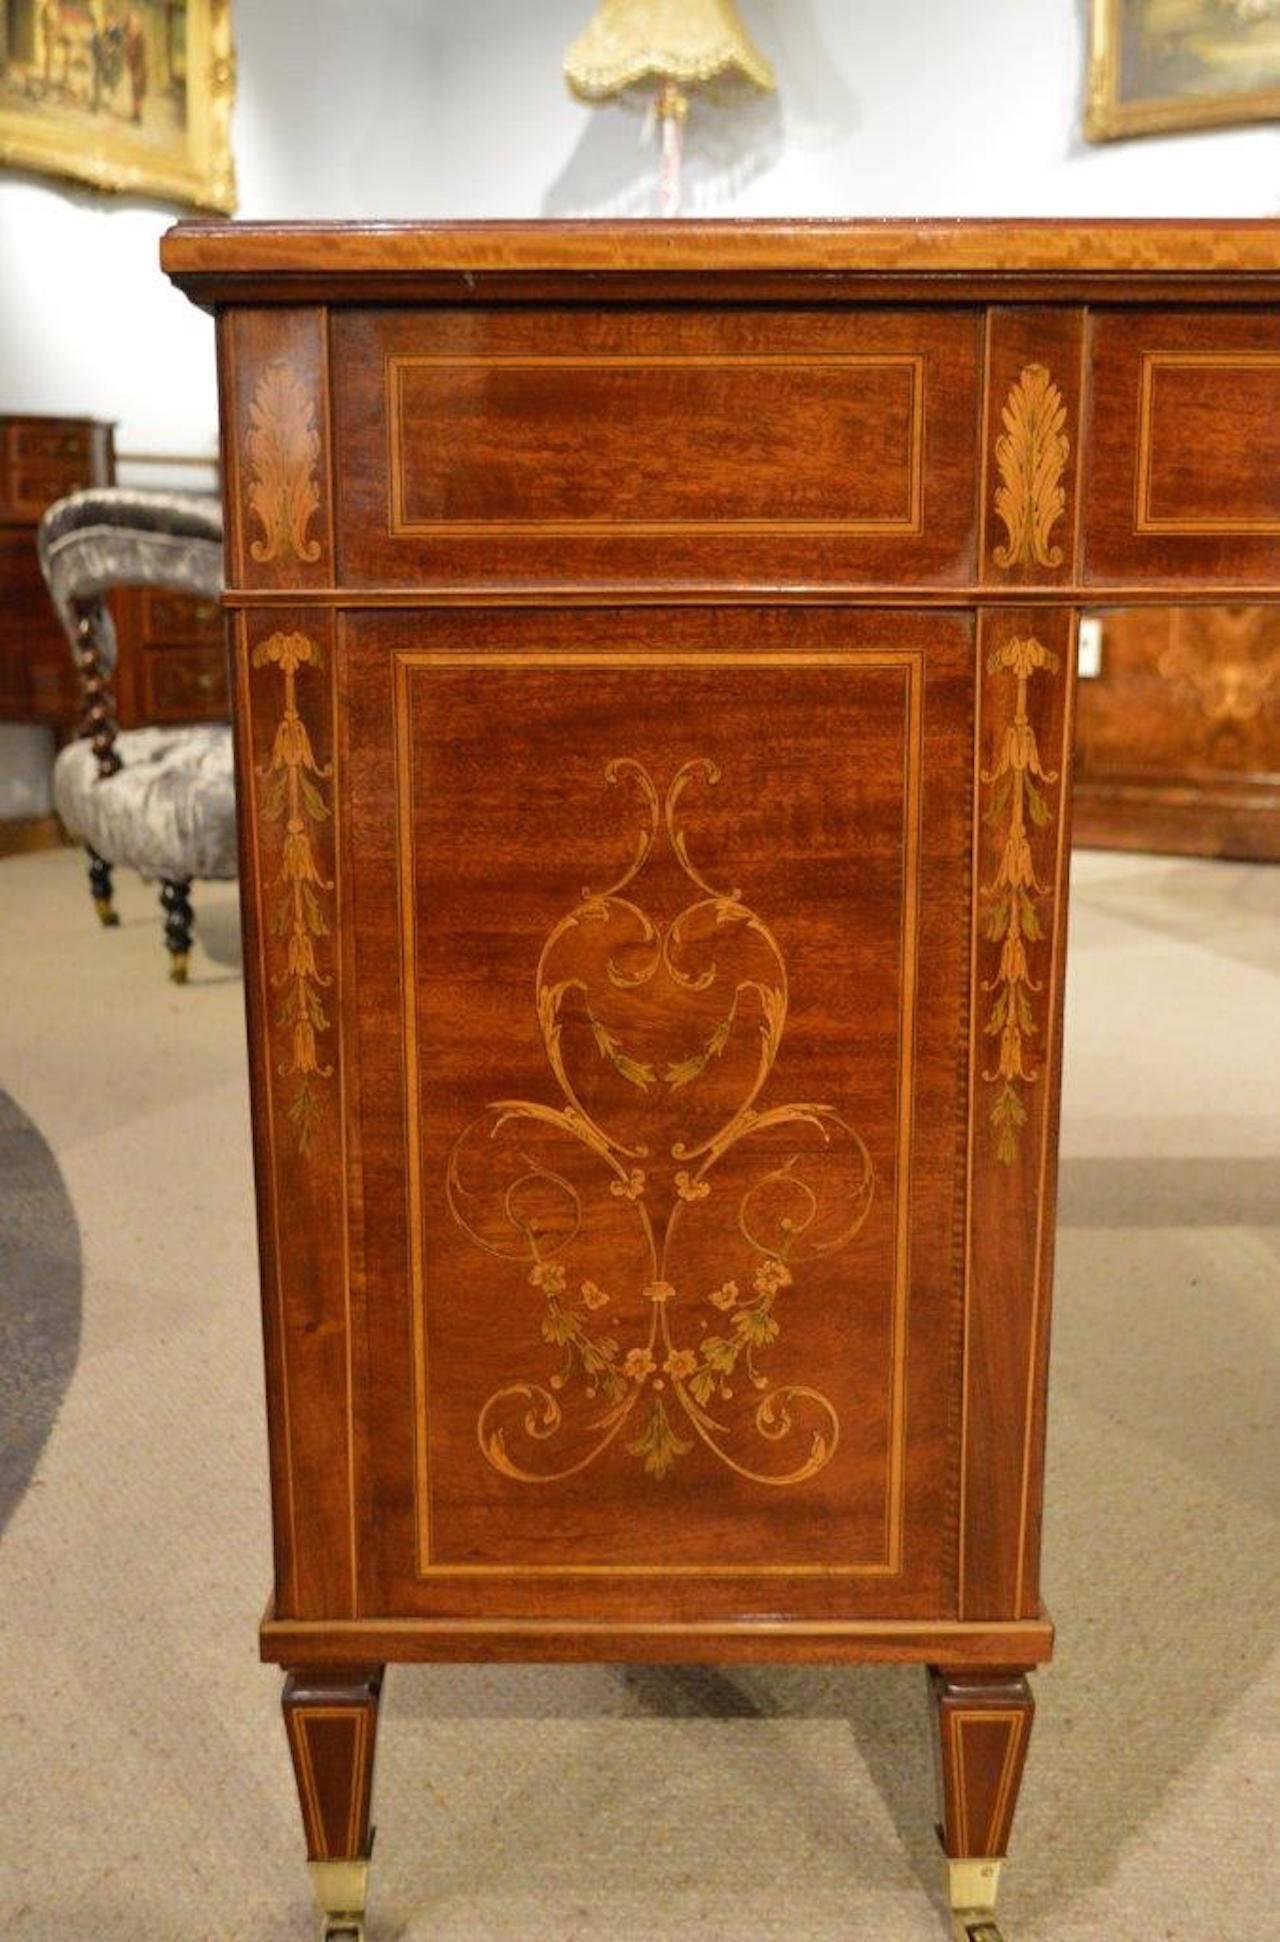 Fine Quality Marquetry and Pen-Work Inlaid Sheraton Revival Antique Writing Desk 1